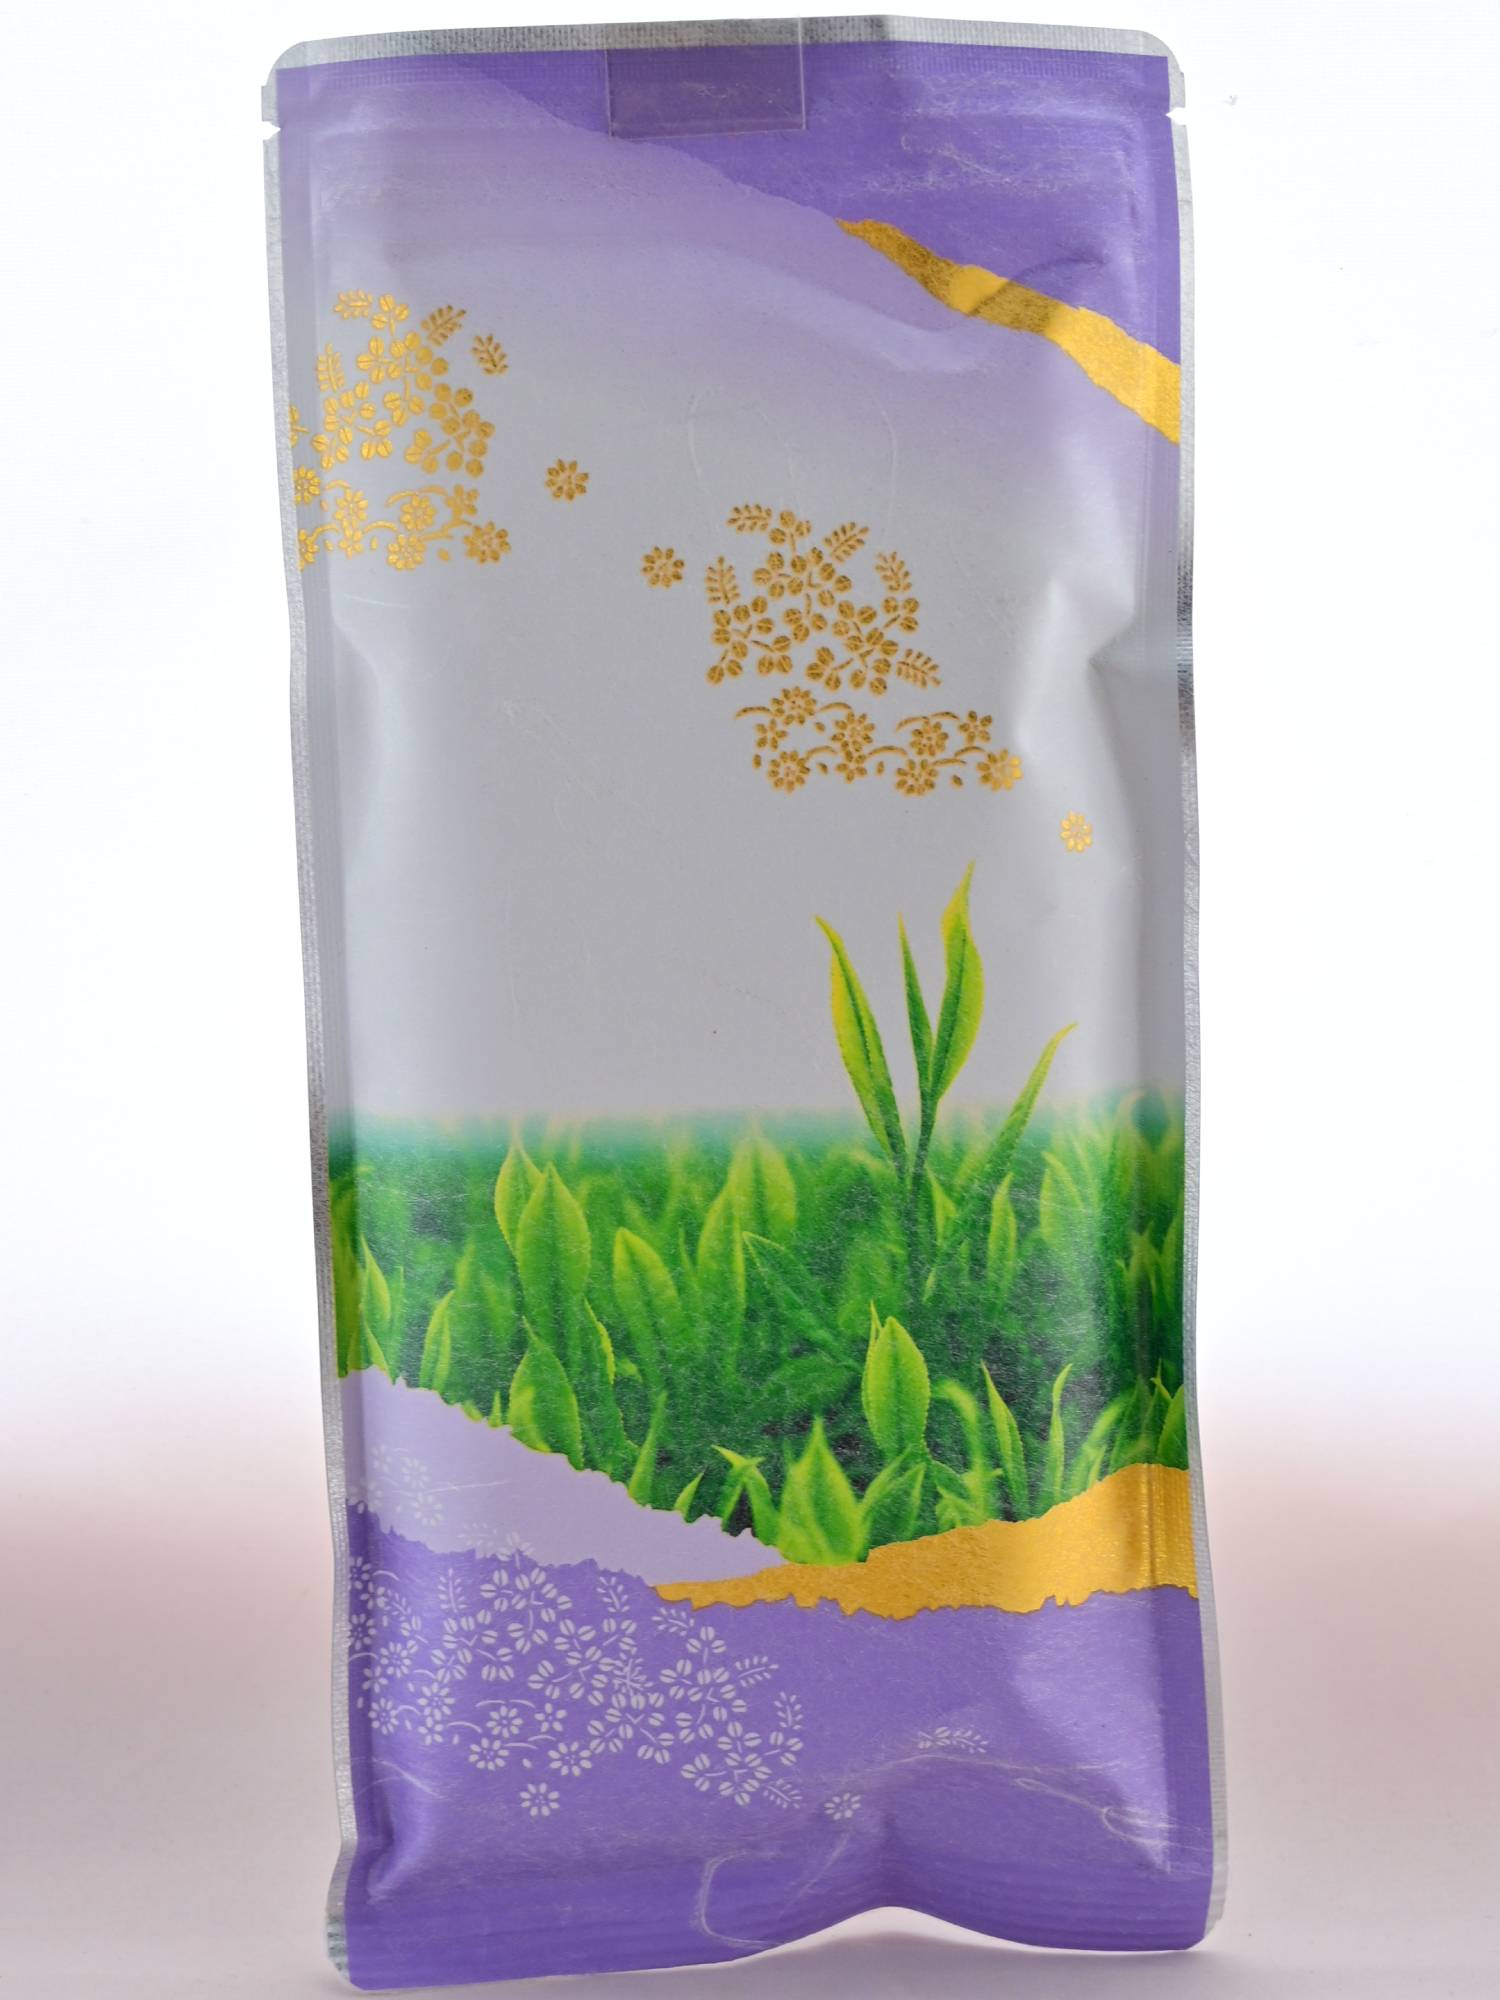 The Bancha packet is primarly purple, with golden-painted mountains and flowers. The image featured in the center of the package is of fresh growth on a tea bush.